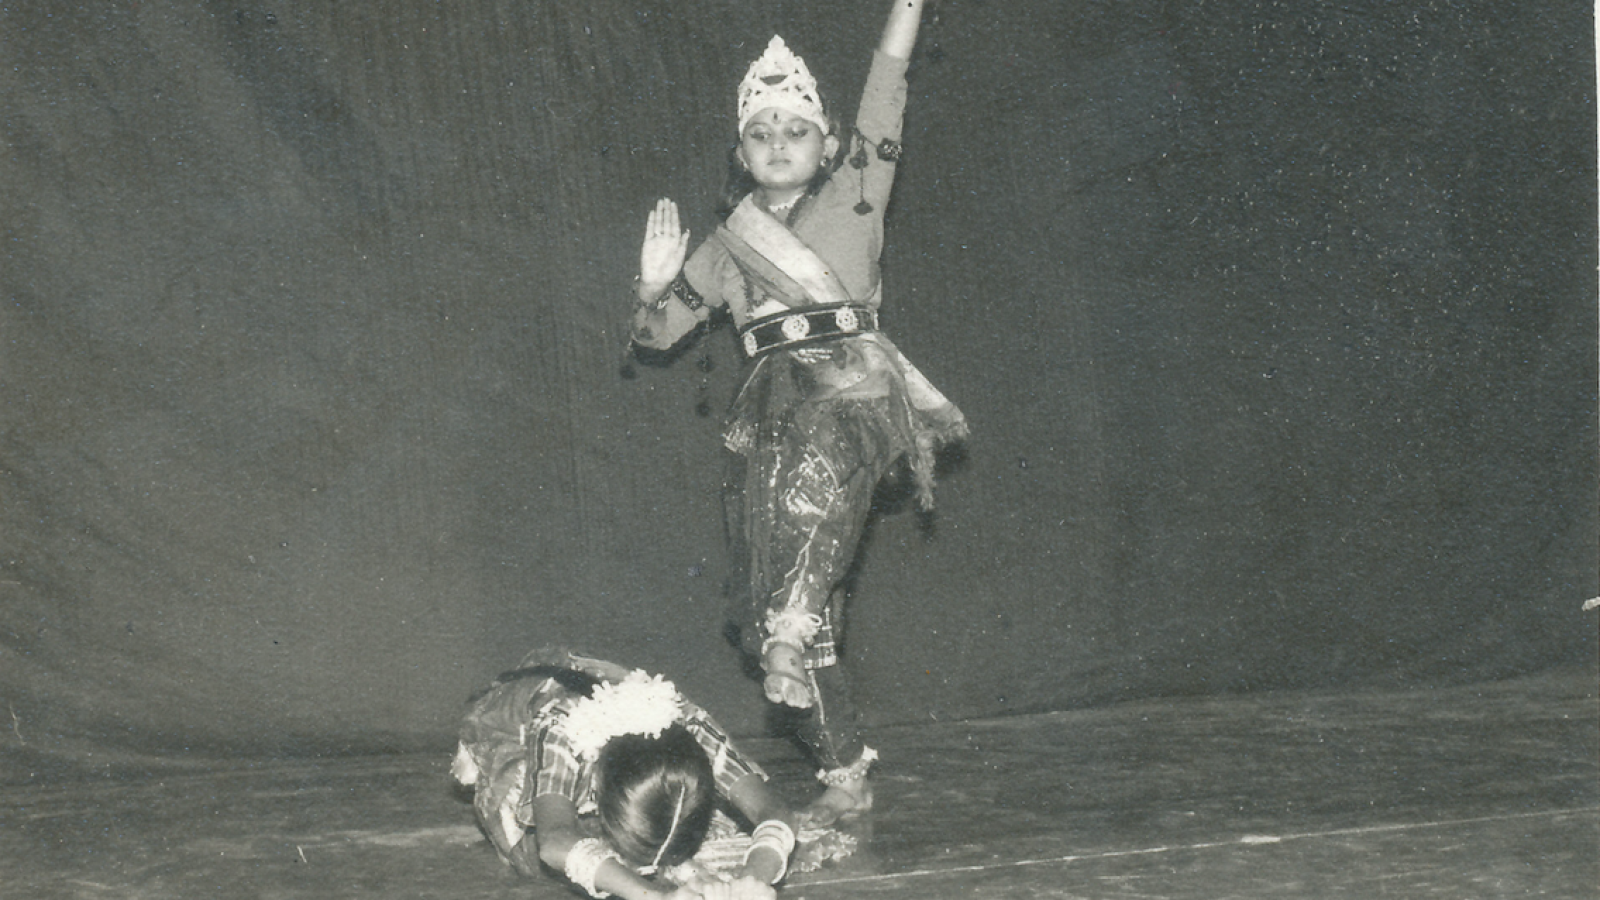 Anupa dancing on stage with another dancer